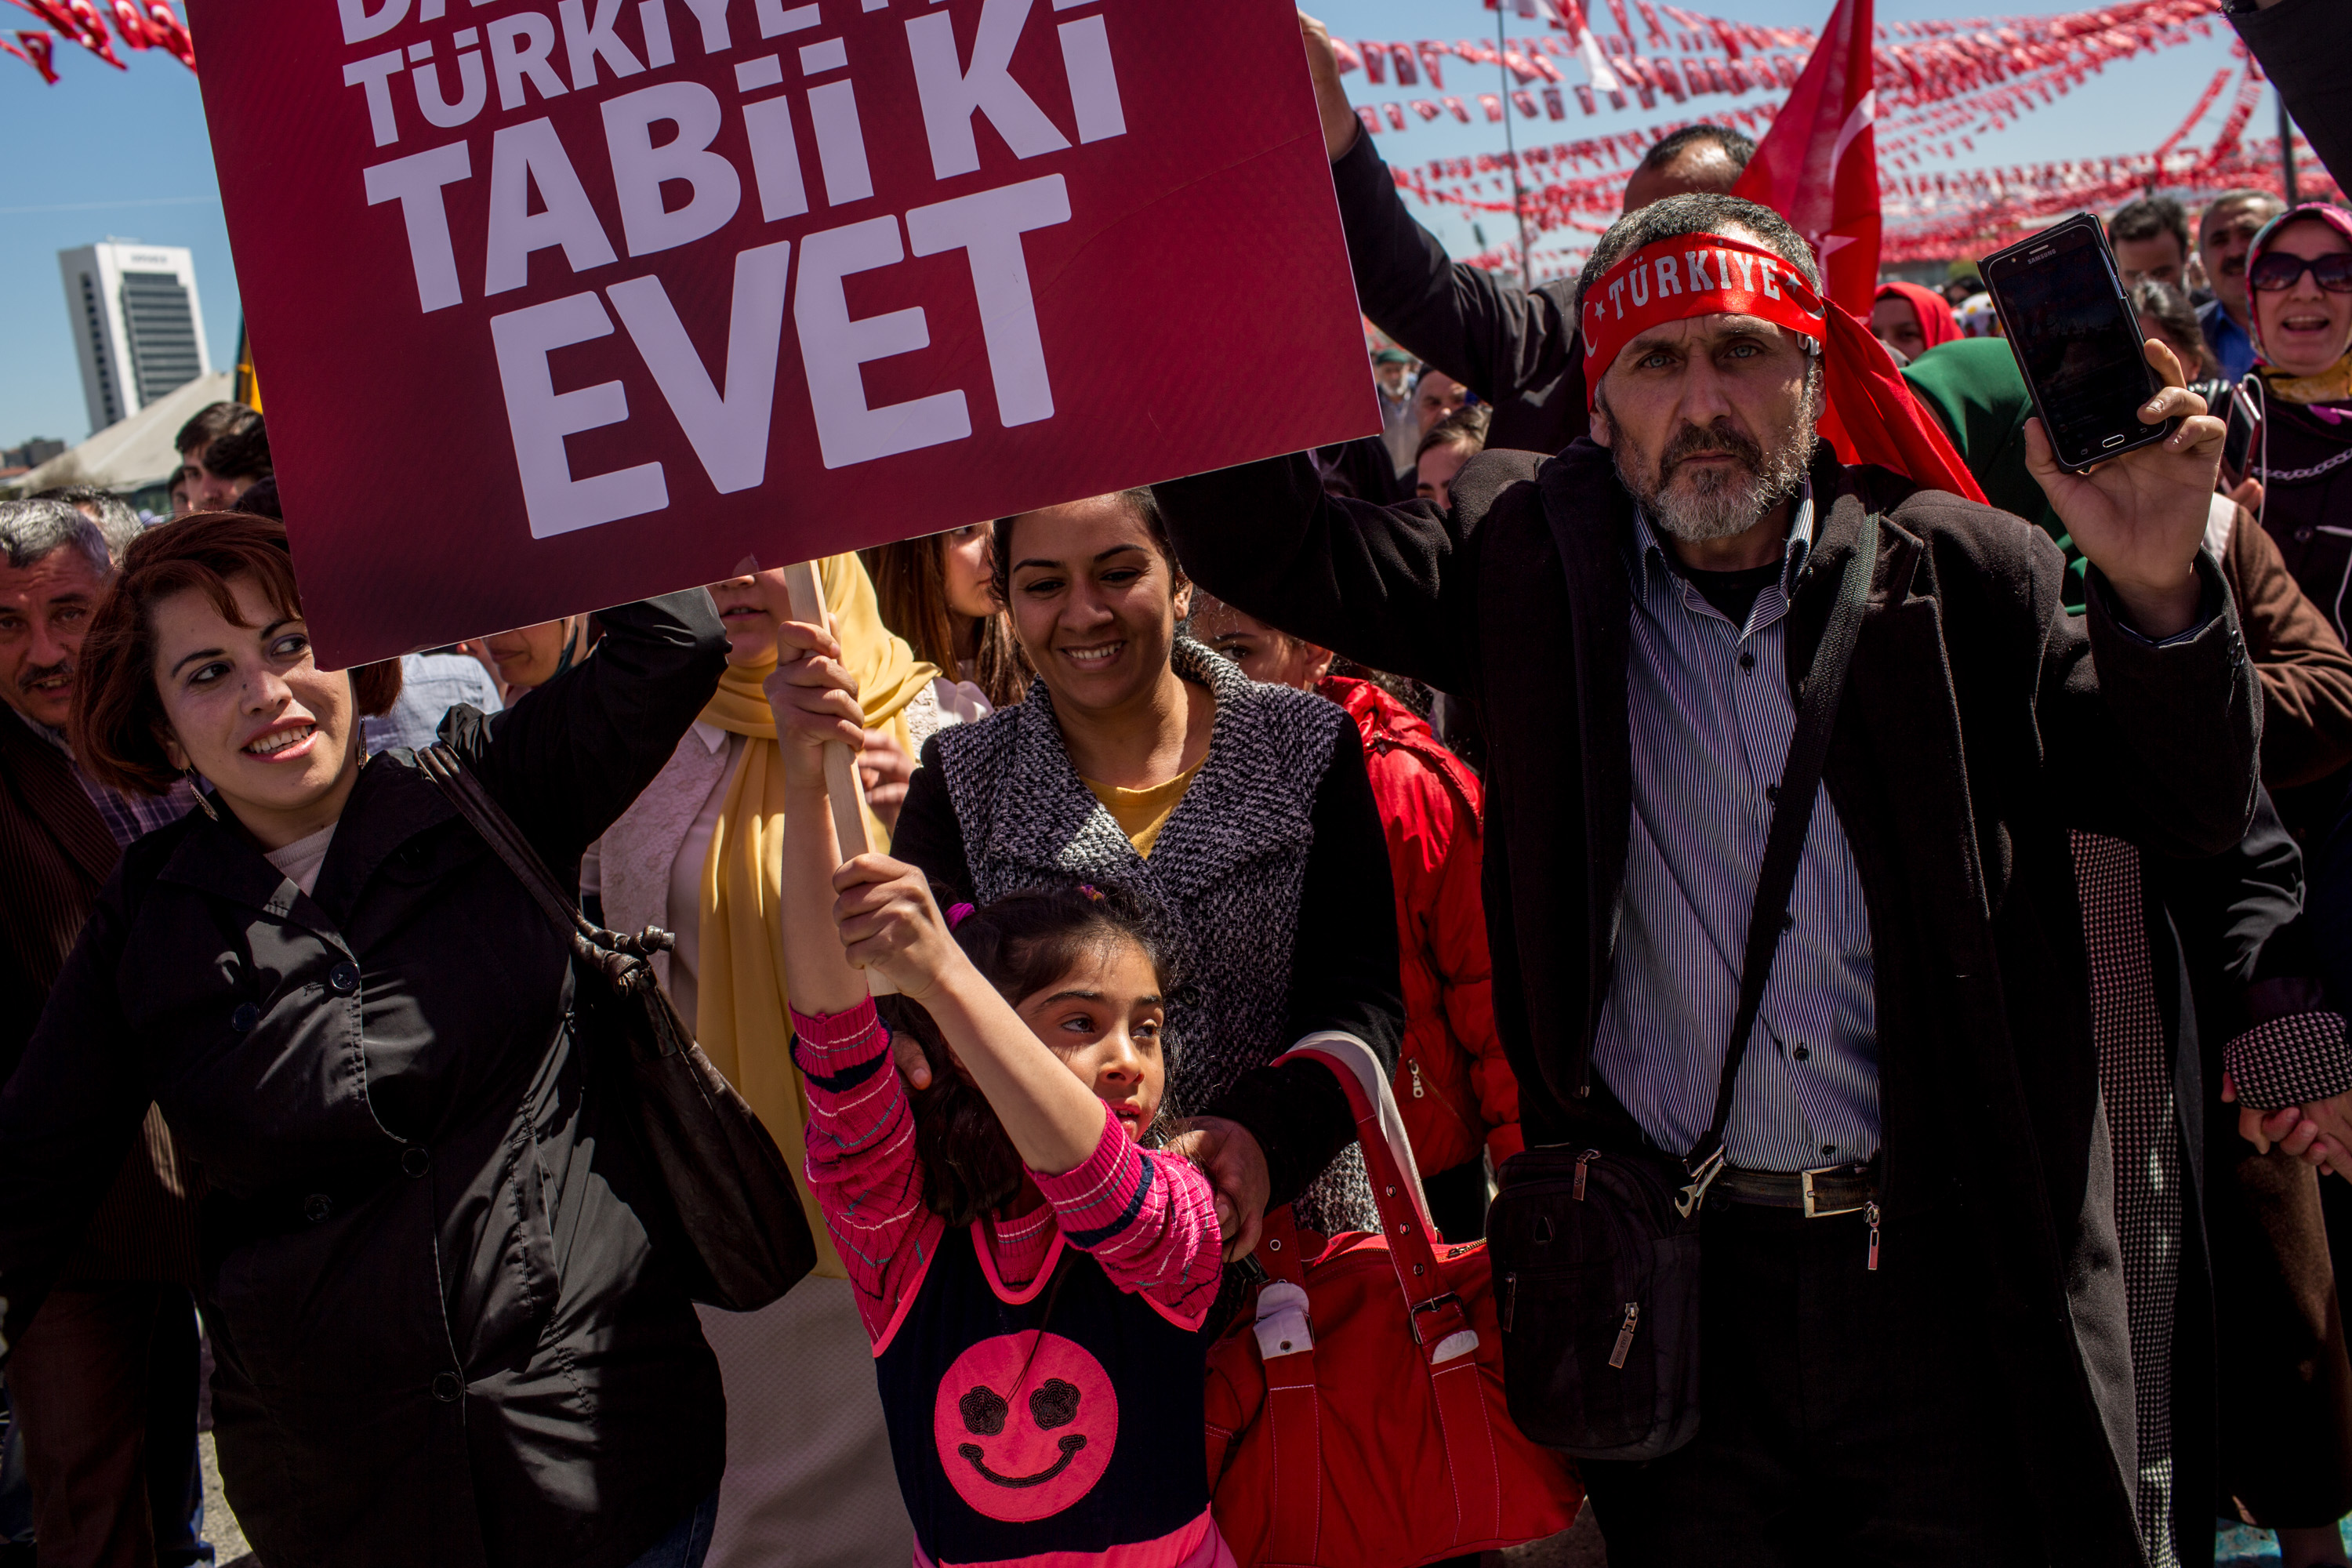 "EVET" (Yes) supprters arrive at a campaign rally hosted by Turkish President Recep Tayyip Erdogan on April 2, 2017 in Ankara, Türkiye. Image: Chris McGrath / Getty Images